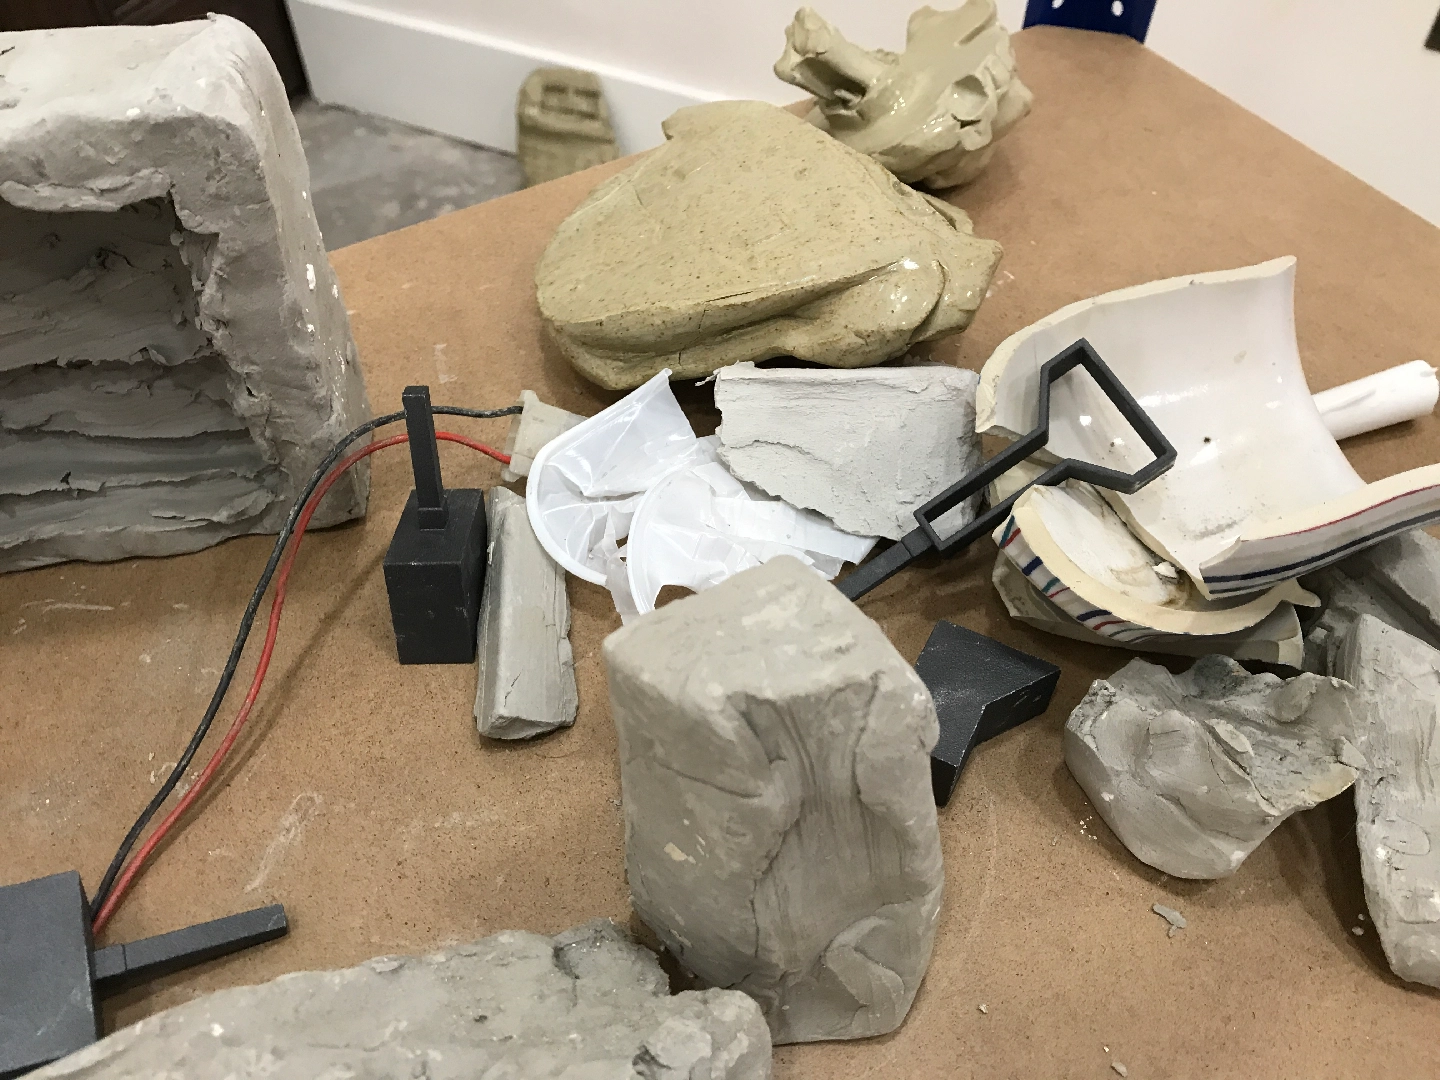 Glazed ceramic, unfired clay, 3D printed SLS plastic, shelving, found objects, plaster